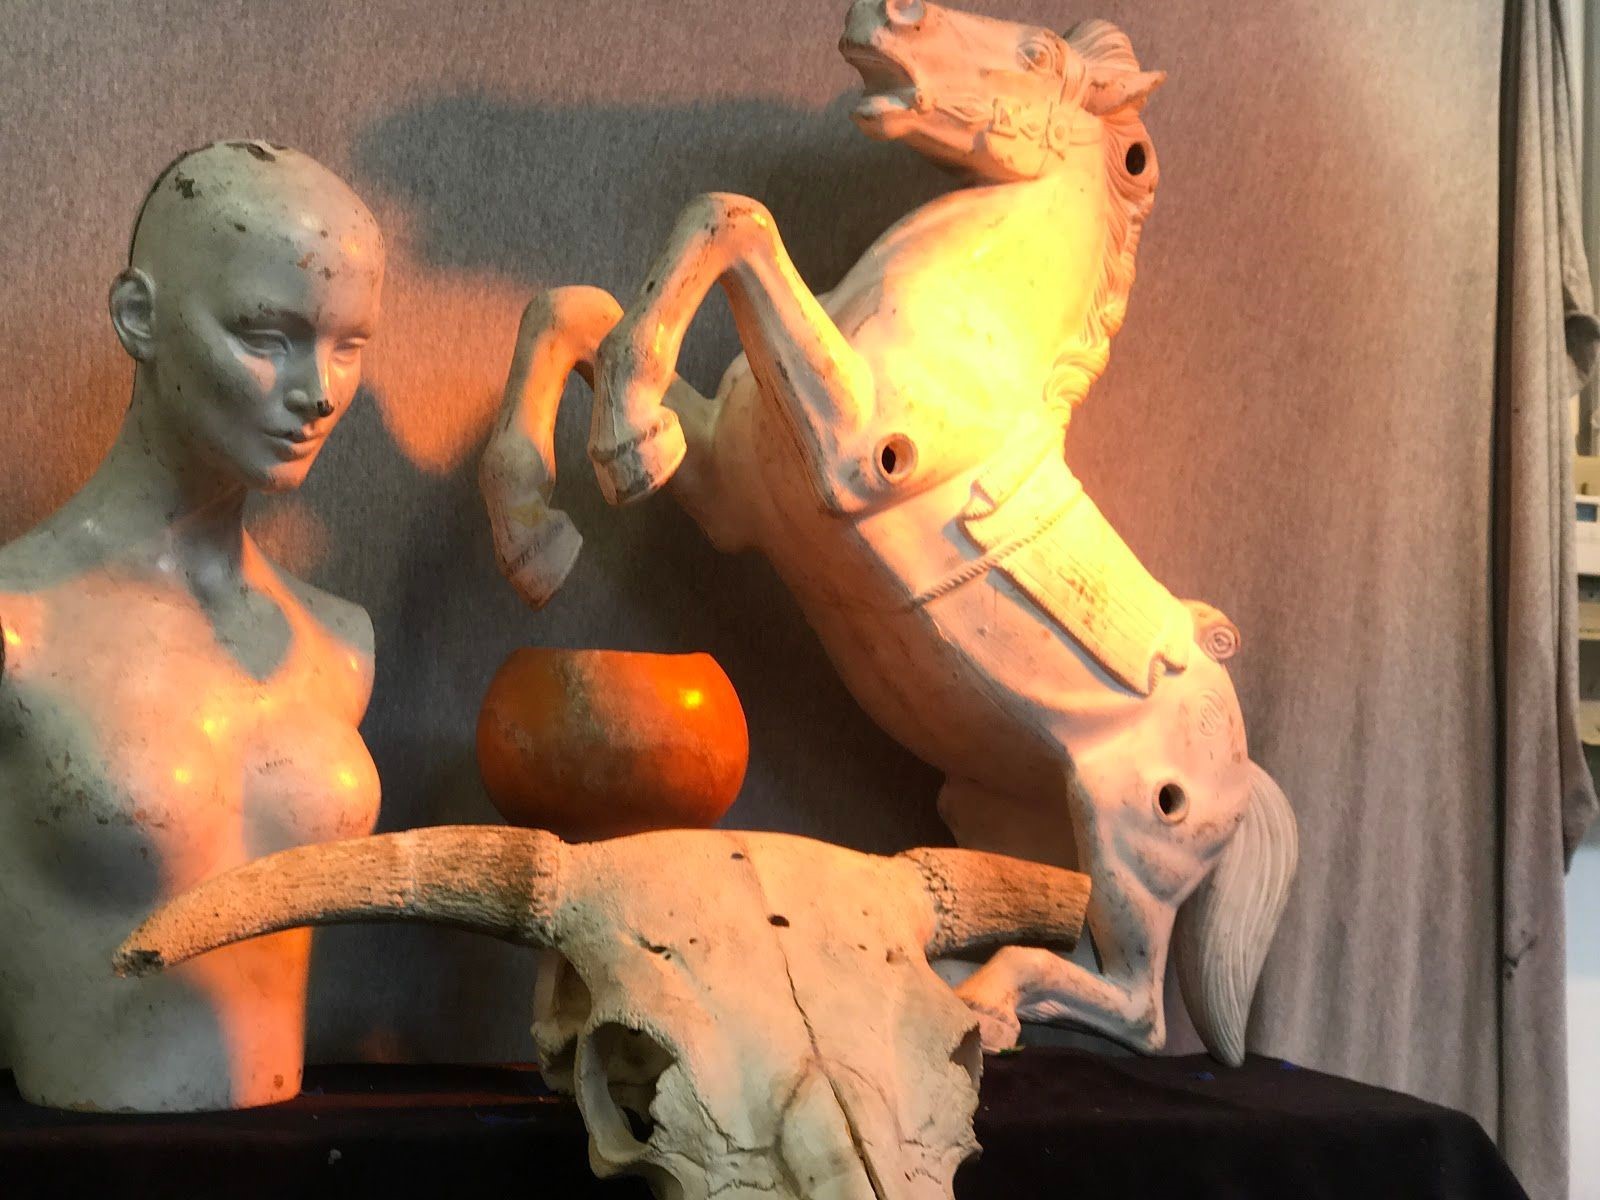 These figures were used for beginning art students to paint. An orange light is positioned overhead to give off a sunset vibe. Photo taken on Sep. ?, 2017 by Jasmine. 